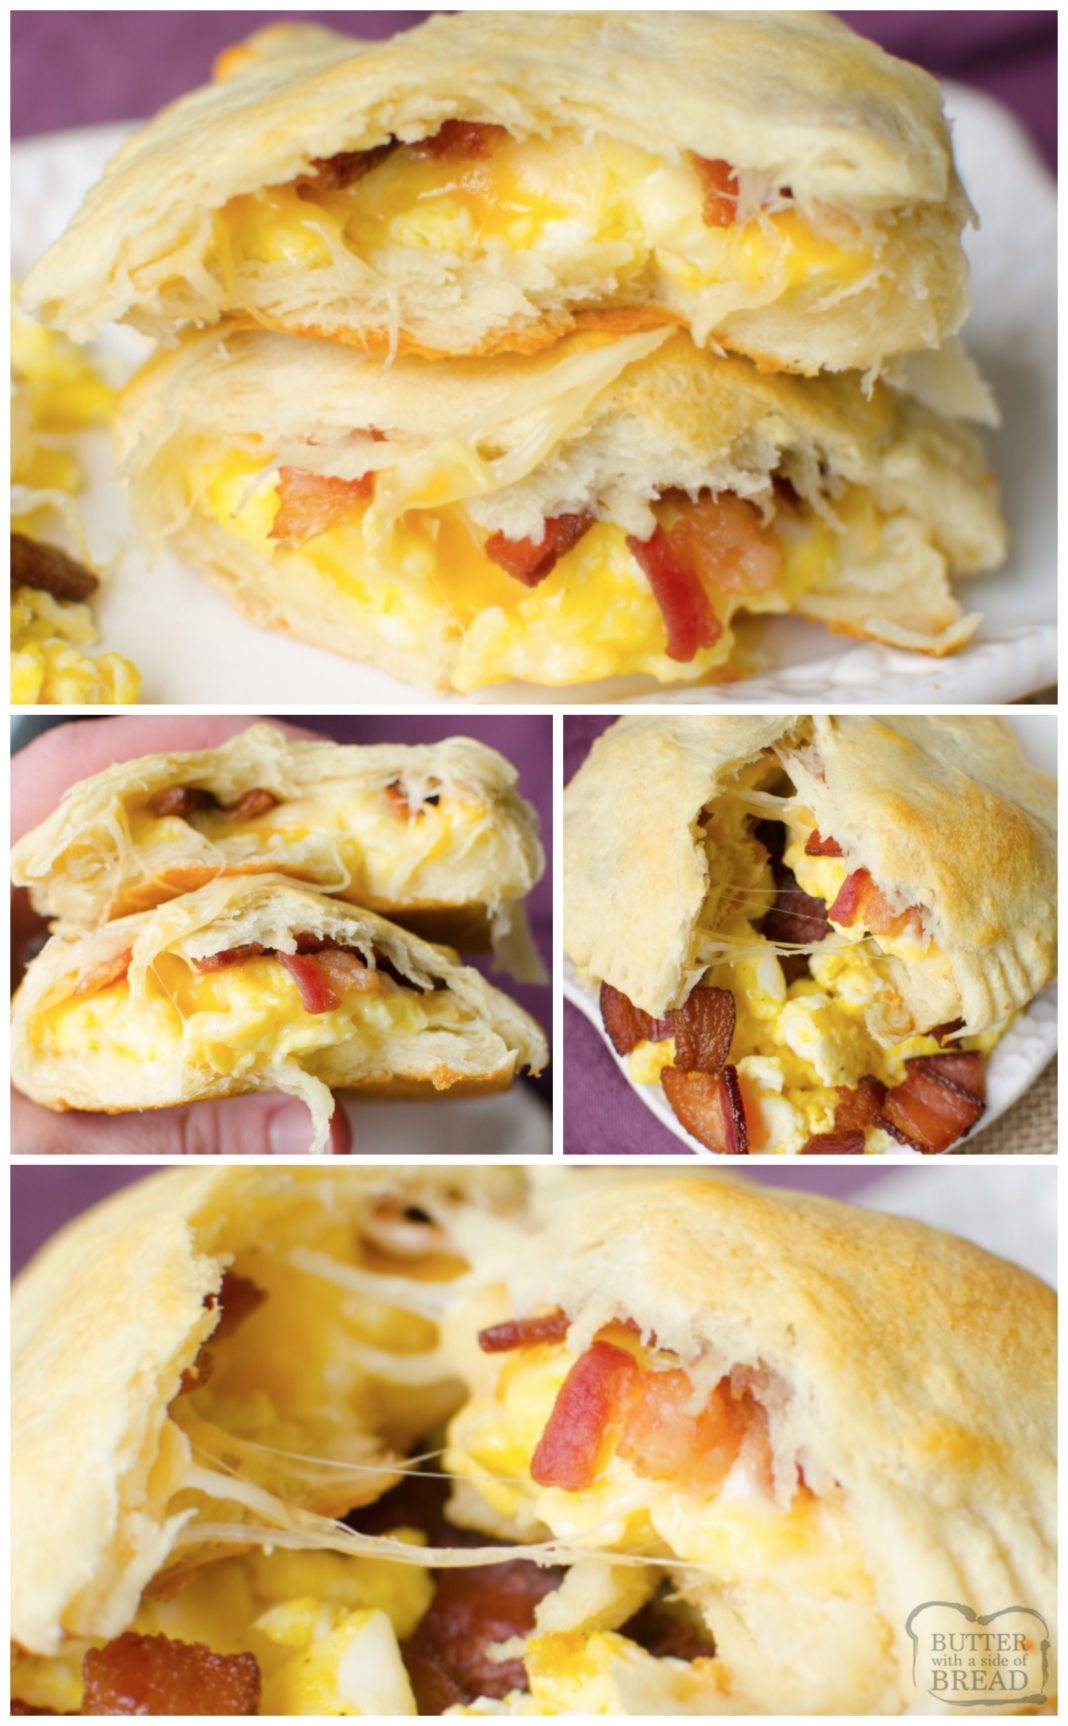 Bacon, Egg and Cheese Baked inside Crescent Dough for an easy breakfast recipe idea.